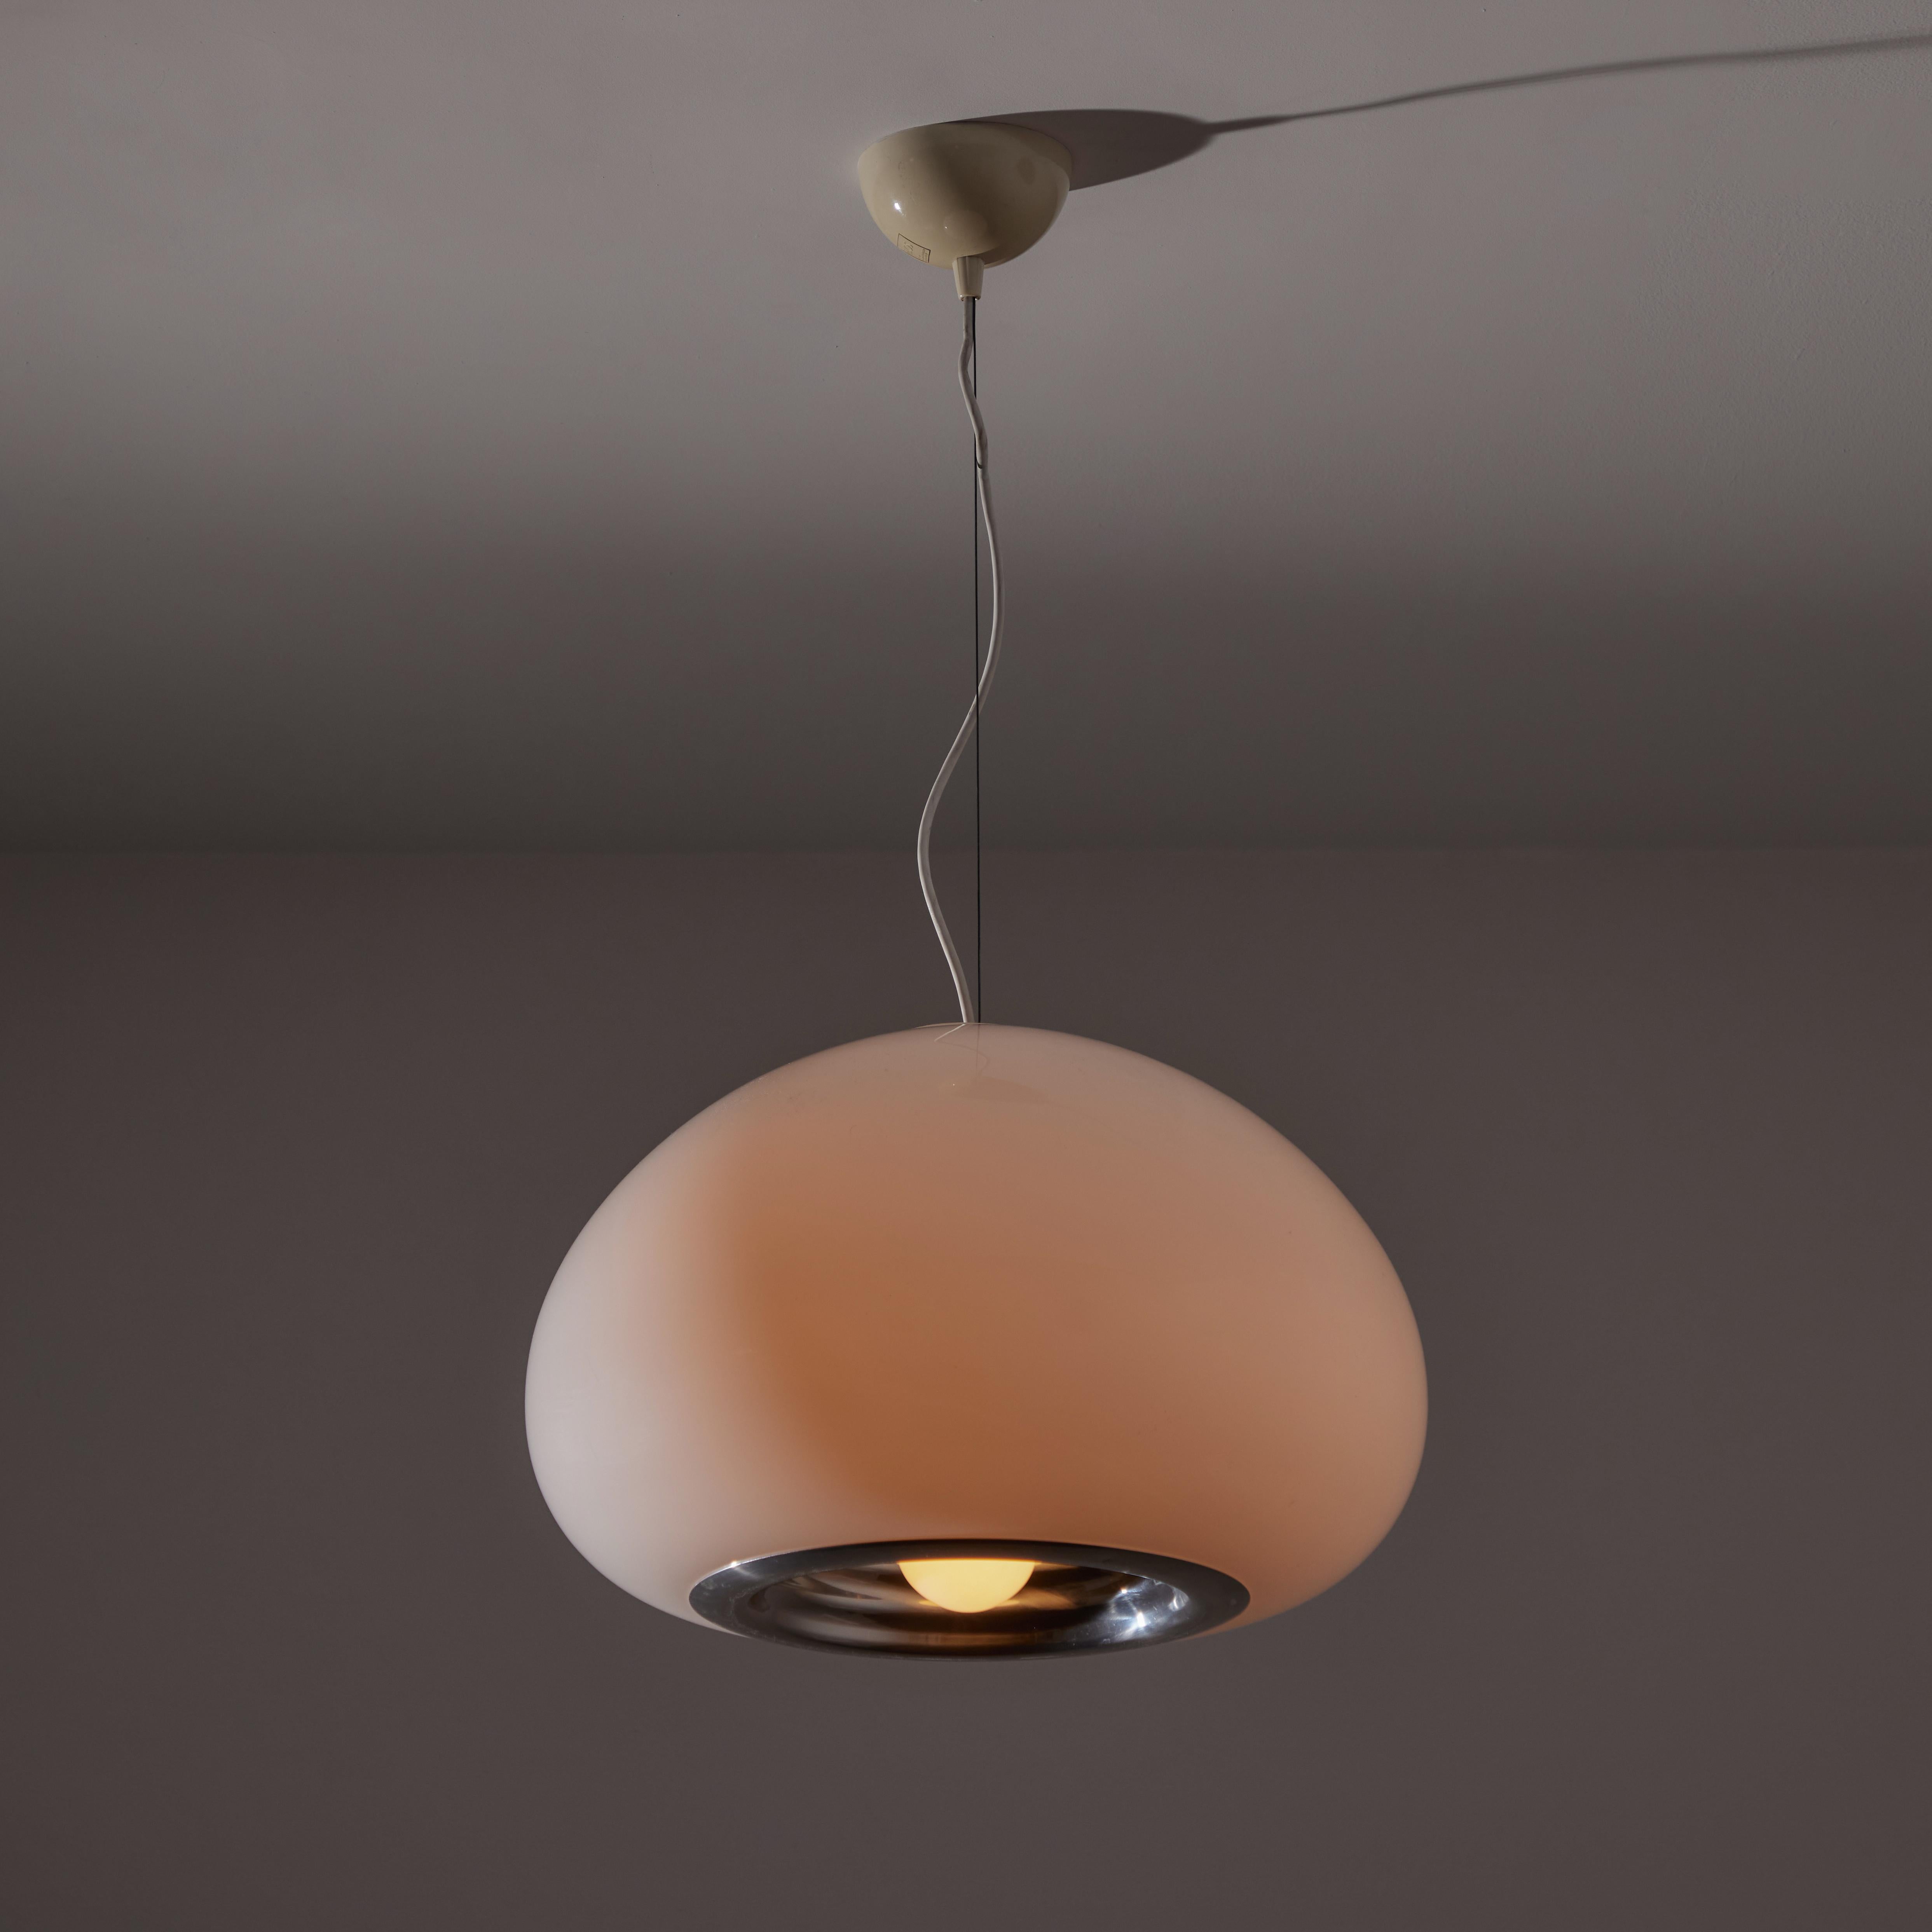 'Black and White' Ceiling Light by Achille & Pier Giacomo Castiglioni for Flos For Sale 4